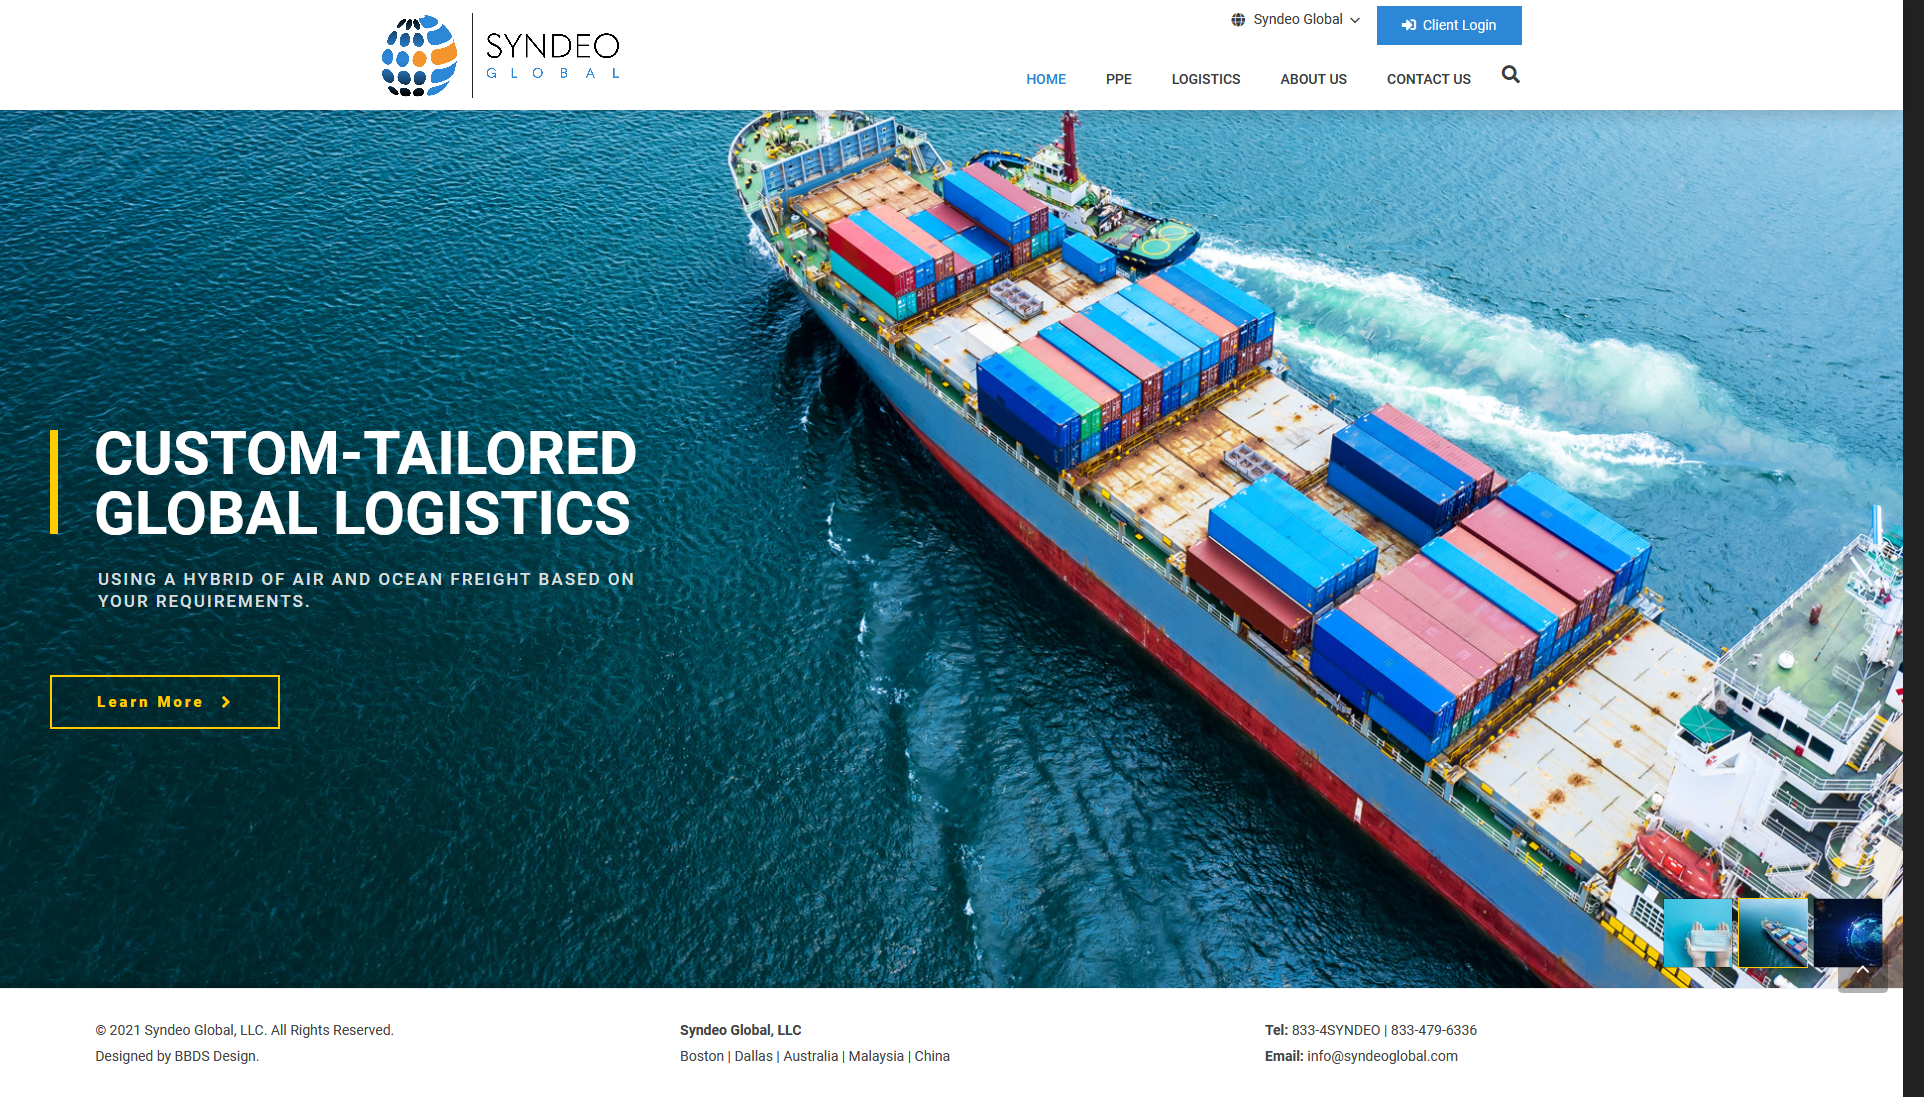 Syndeo Global, LLC - Modern Logistics to The Rescue